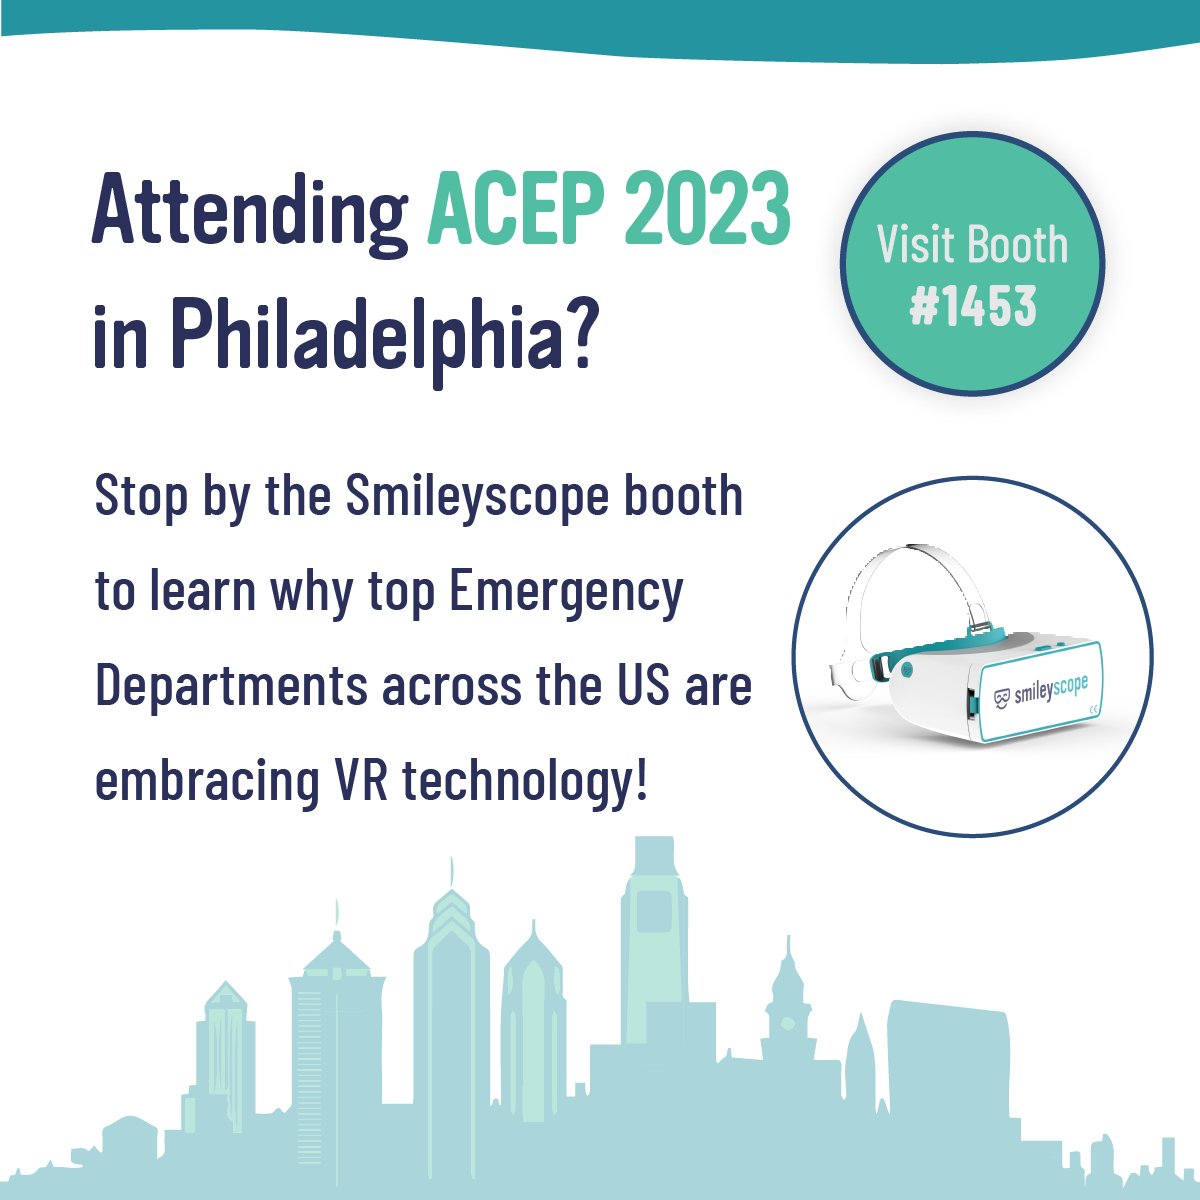 Next week over 6,000 emergency medicine physicians will head to Philadelphia for the #ACEP2023 conference. Will we see you there? Top EDs like @Nicklaus4Kids are implementing Smileyscope VR to improve patient and provider experience! Read more: lnkd.in/gpGZ7dVY